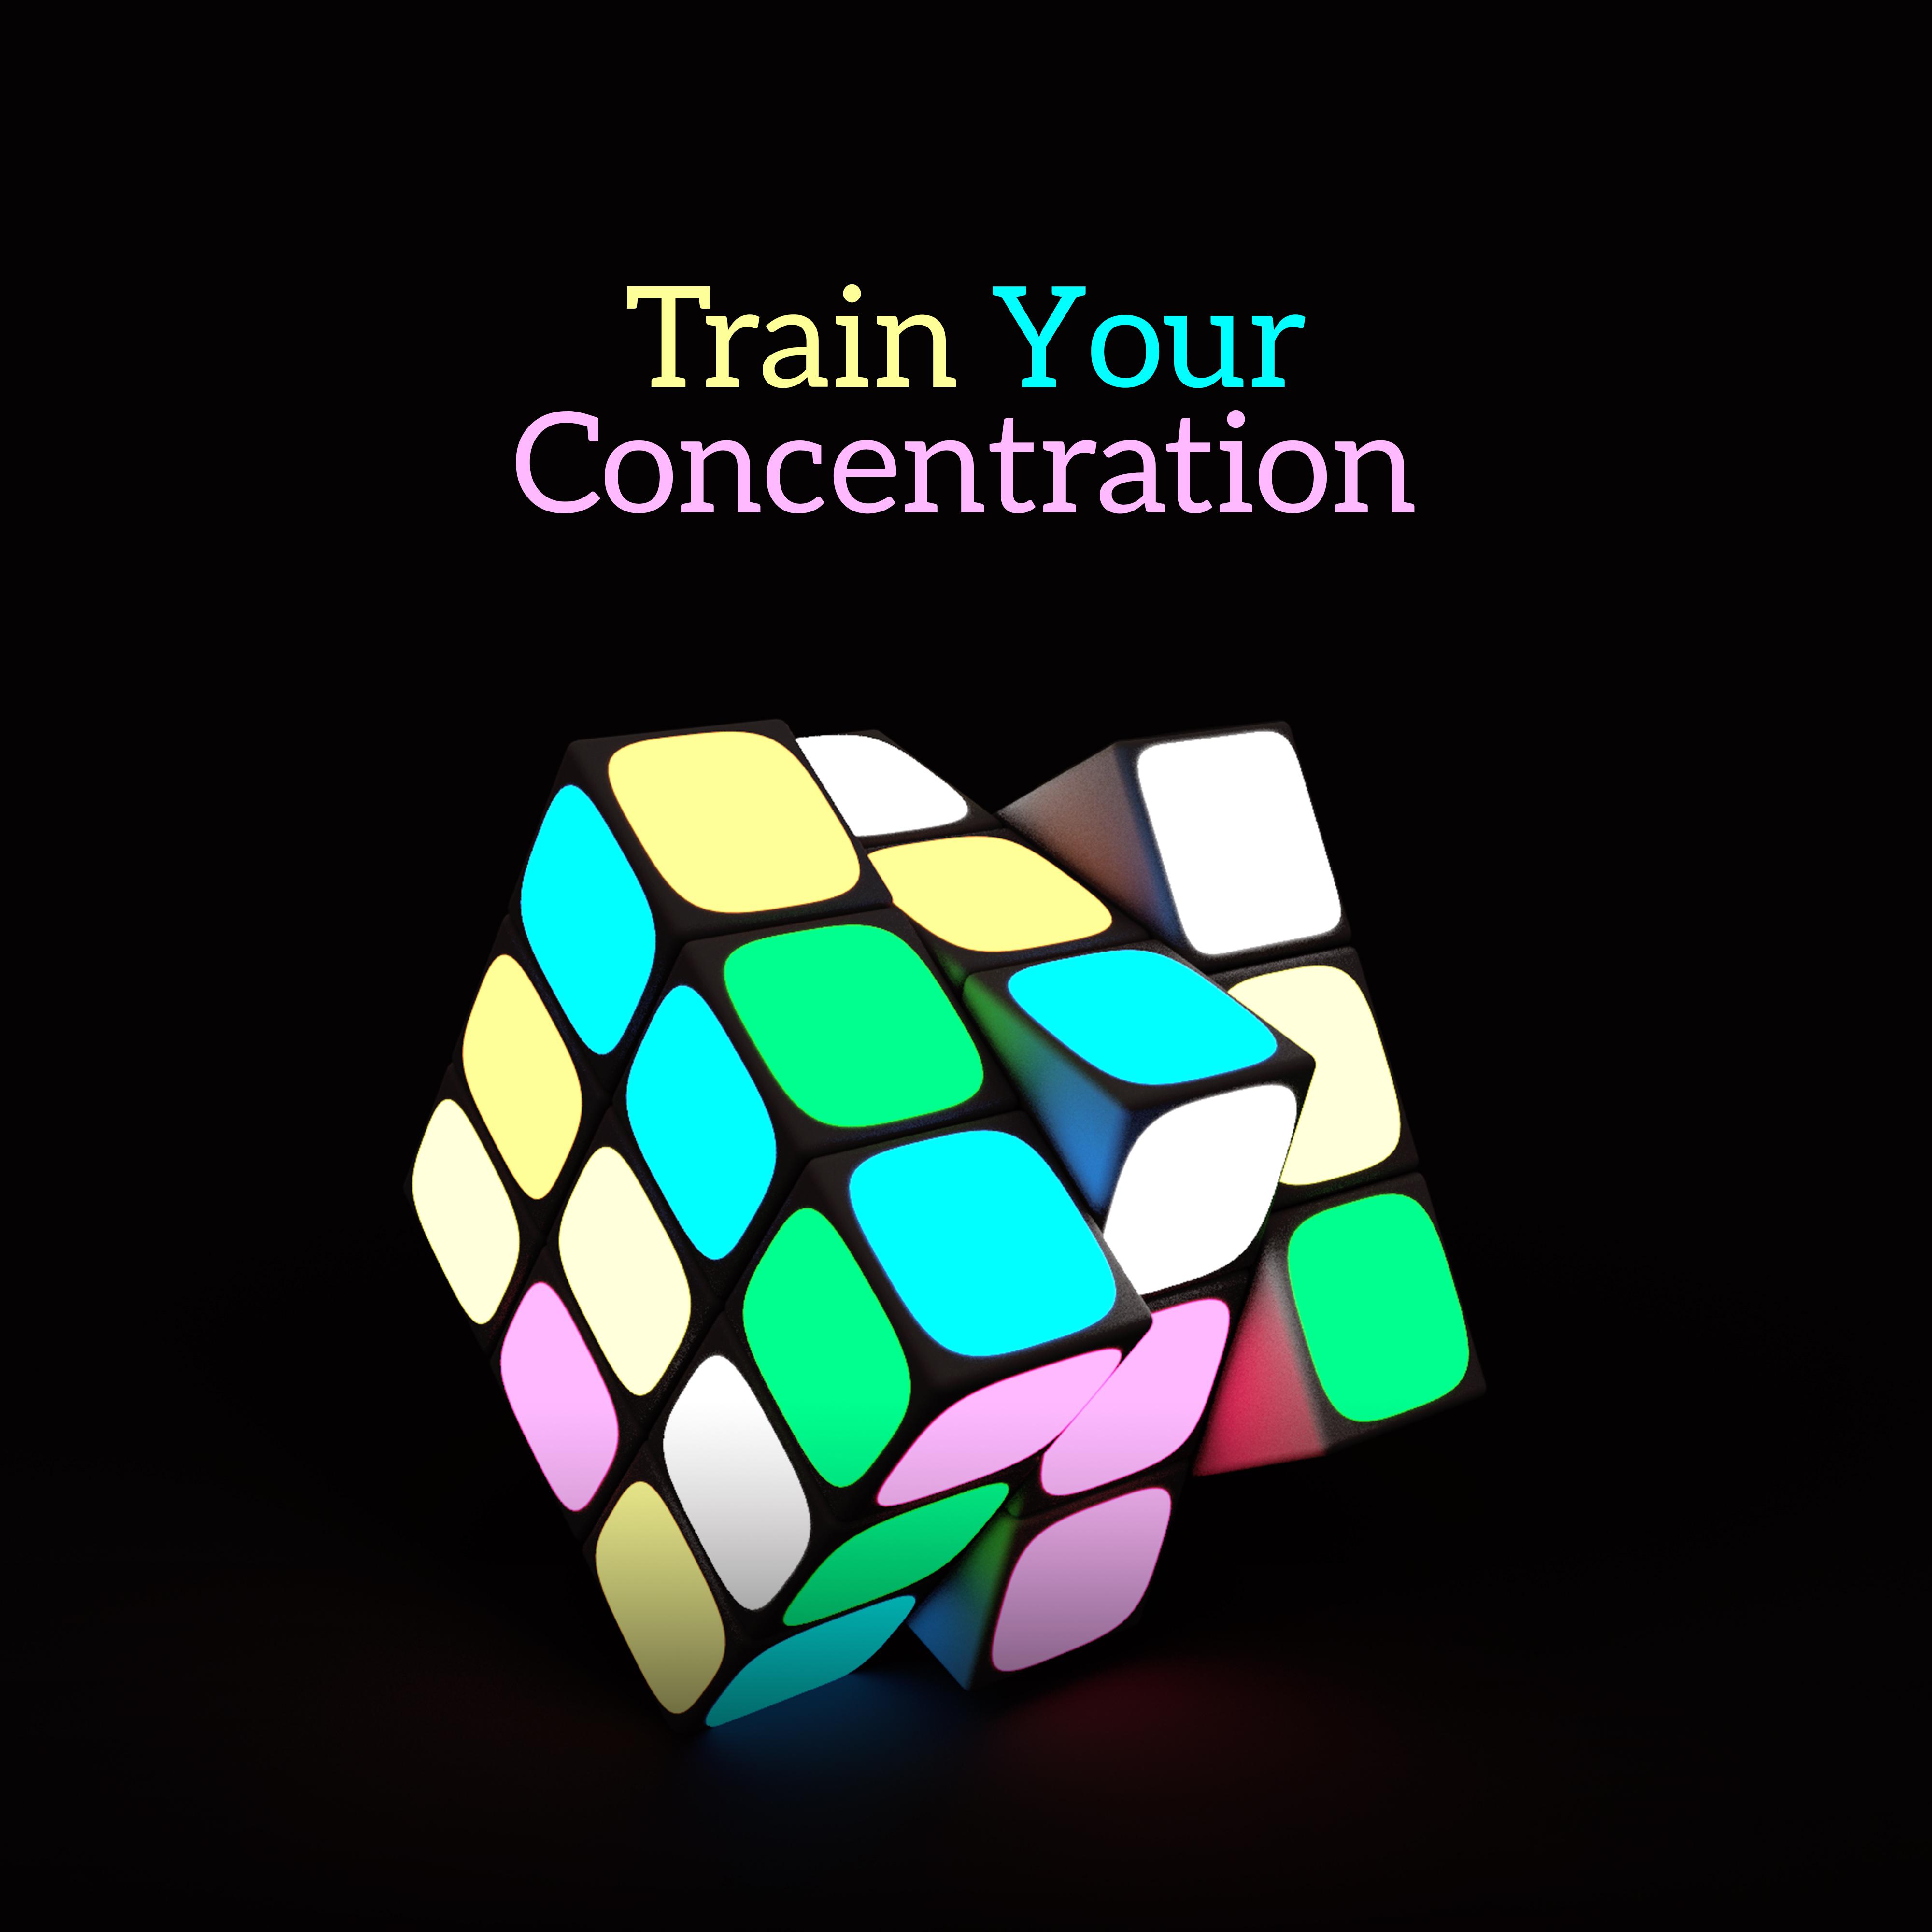 Train Your Concentration – Hatha Yoga, Inner Silence, Chakra, Deep Meditation, Nature Sounds, Tranquility